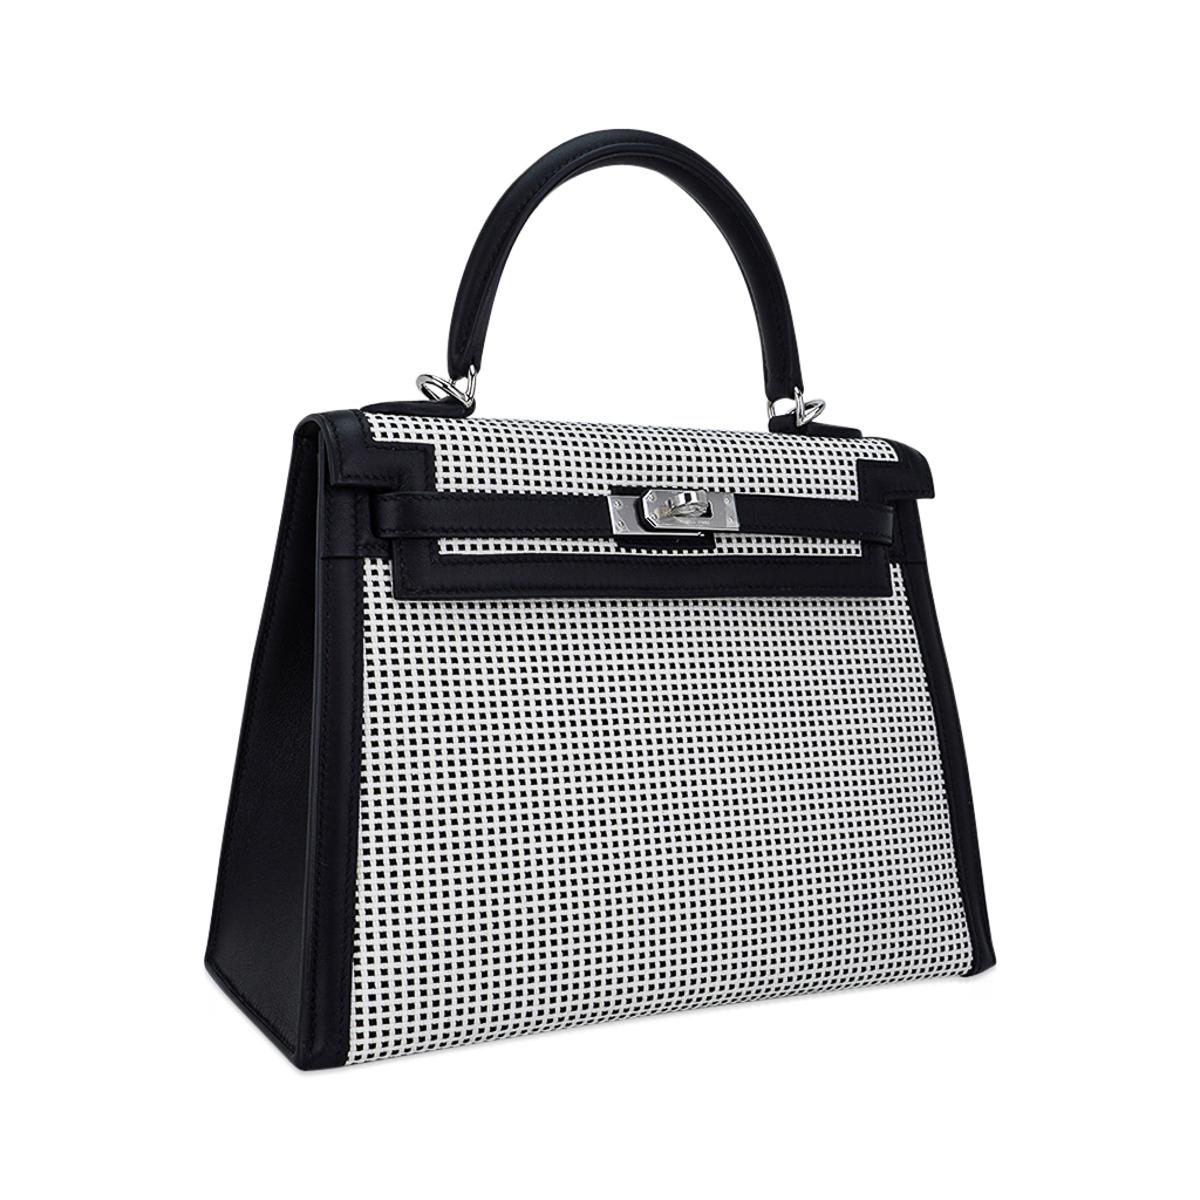 Mightychic offers an exquisite Hermes Kelly Quadrille 25 Sellier bag featured in crisp Black and White Viking toile.
Very rare to  find in the 25 cm size.
Accentuated with palladium hardware and Black Swift leather.
Comes with signature Hermes